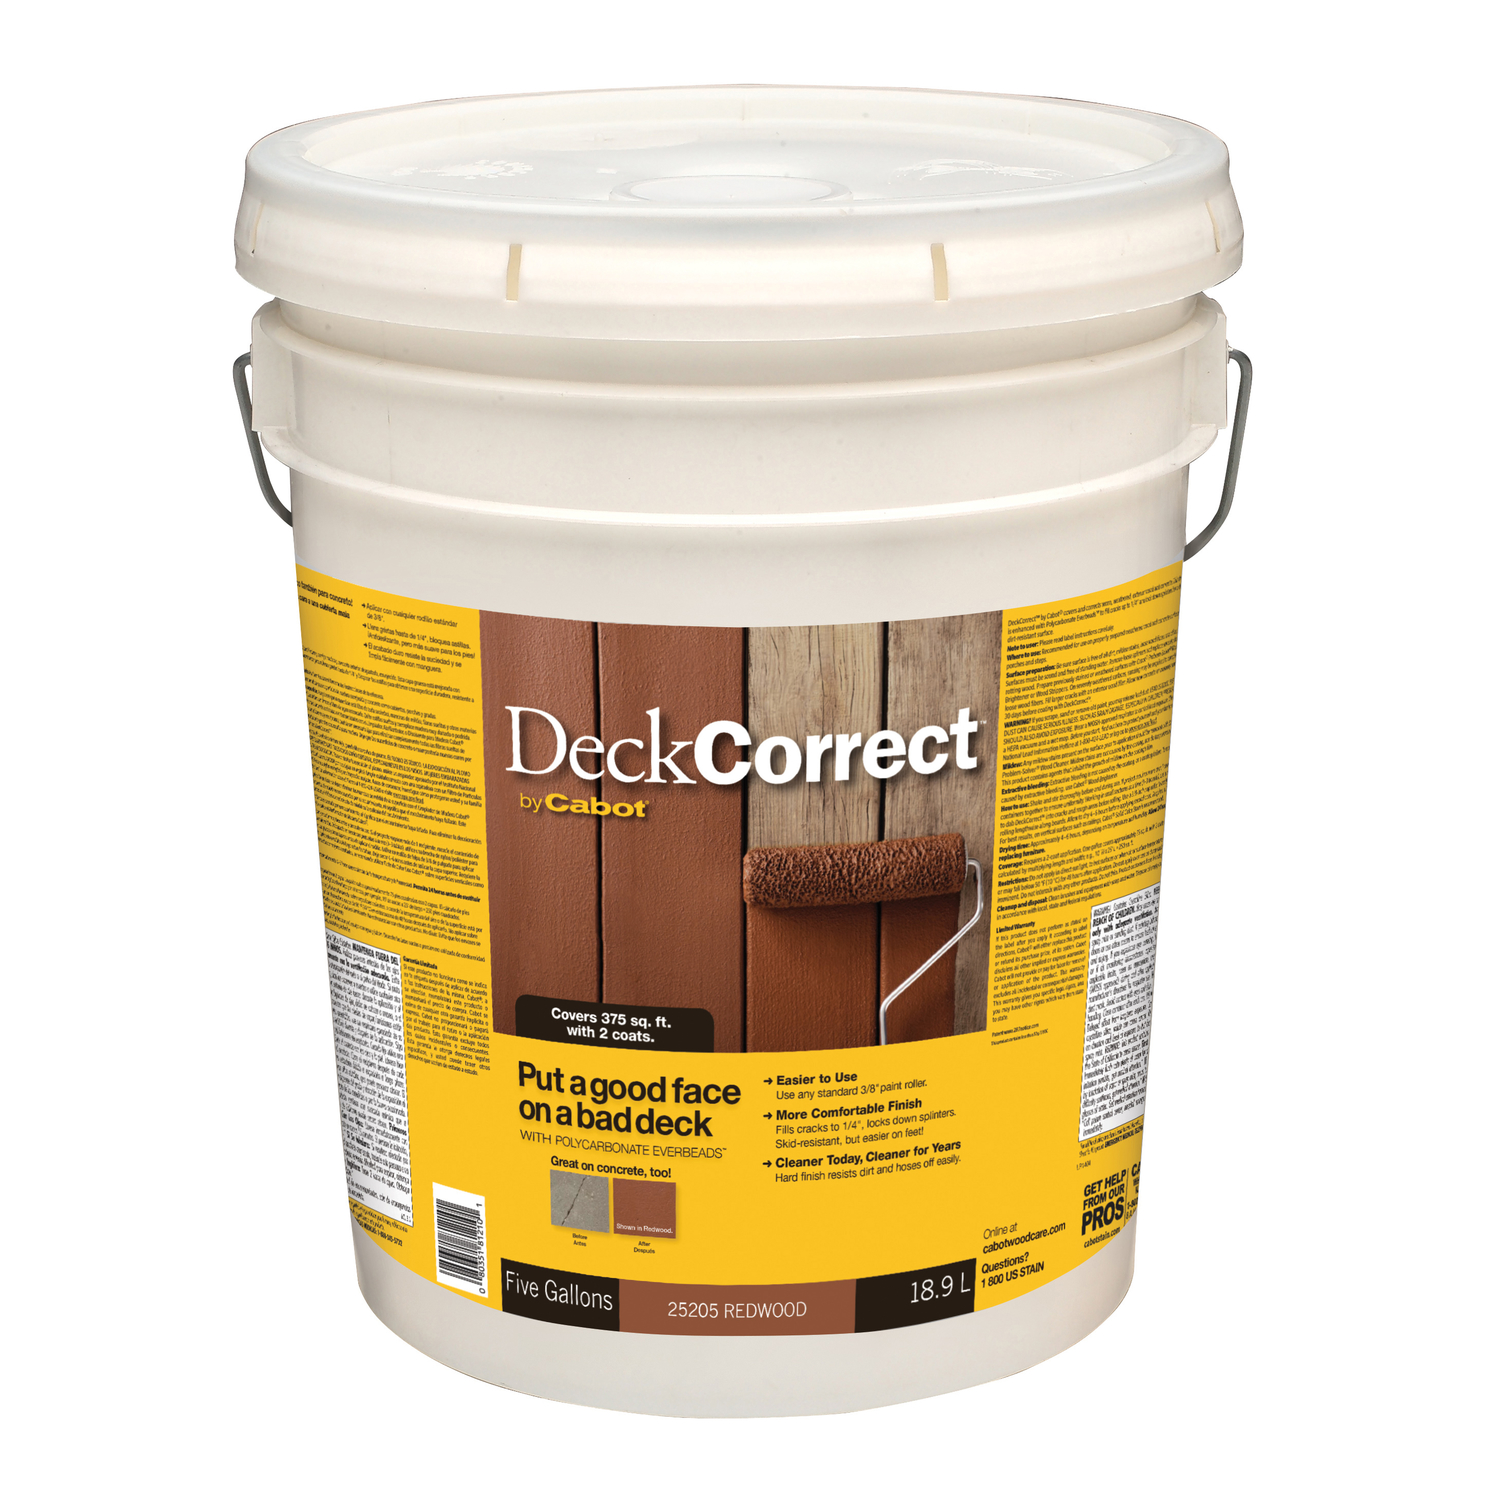 UPC 080351812101 product image for Cabot 5 Gallon Redwood Deck Corrector Wood Stain (05-25205) | upcitemdb.com